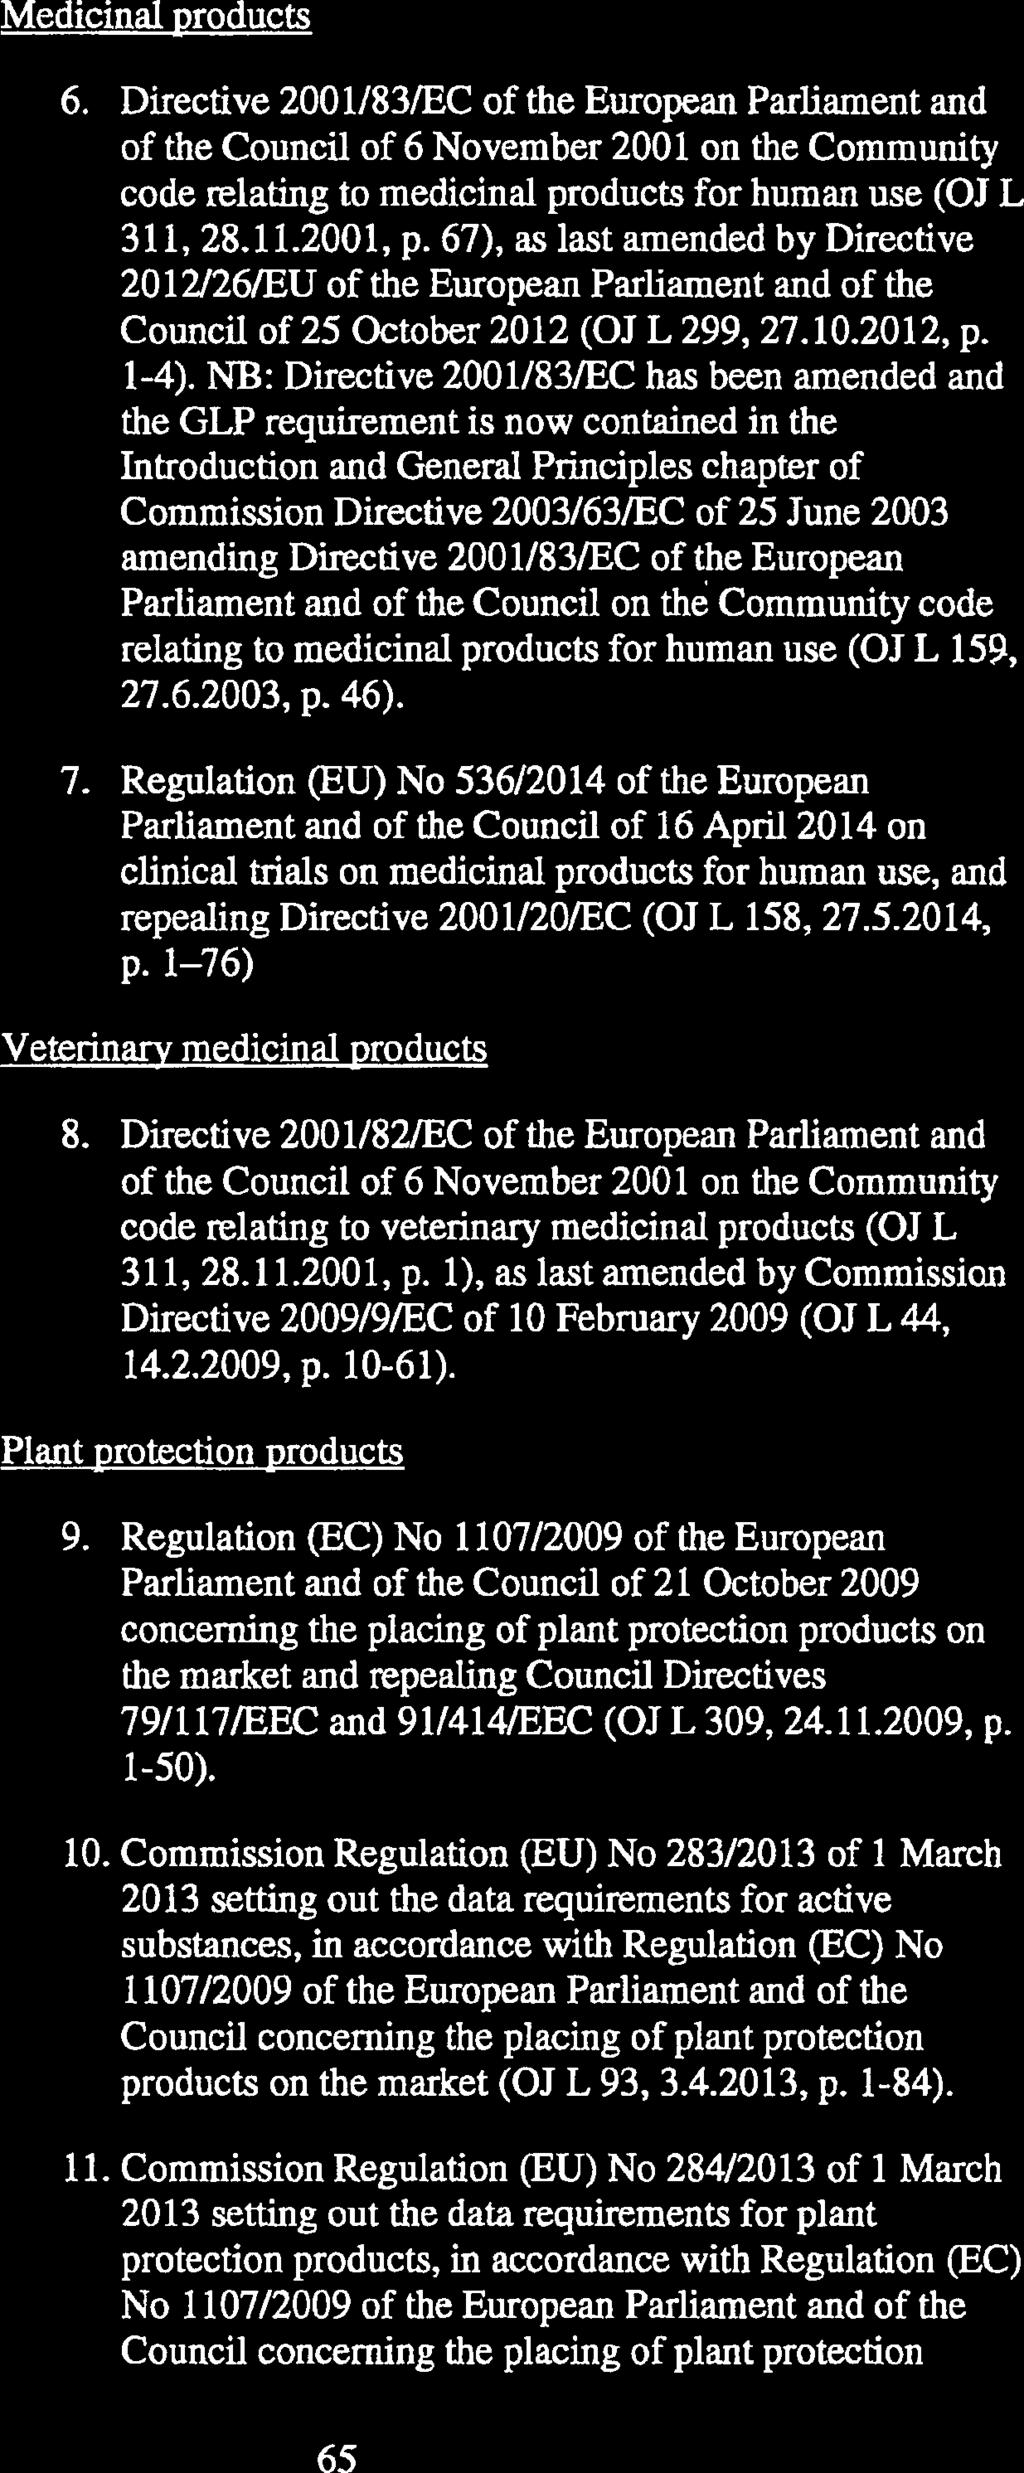 Medicinal products 6. Directive 2001/83/EC of the European Parliament and of the Council of 6 November 2001 on the Community code relating to medicinal products for human use (OJ L 311, 28.11.2001, p.